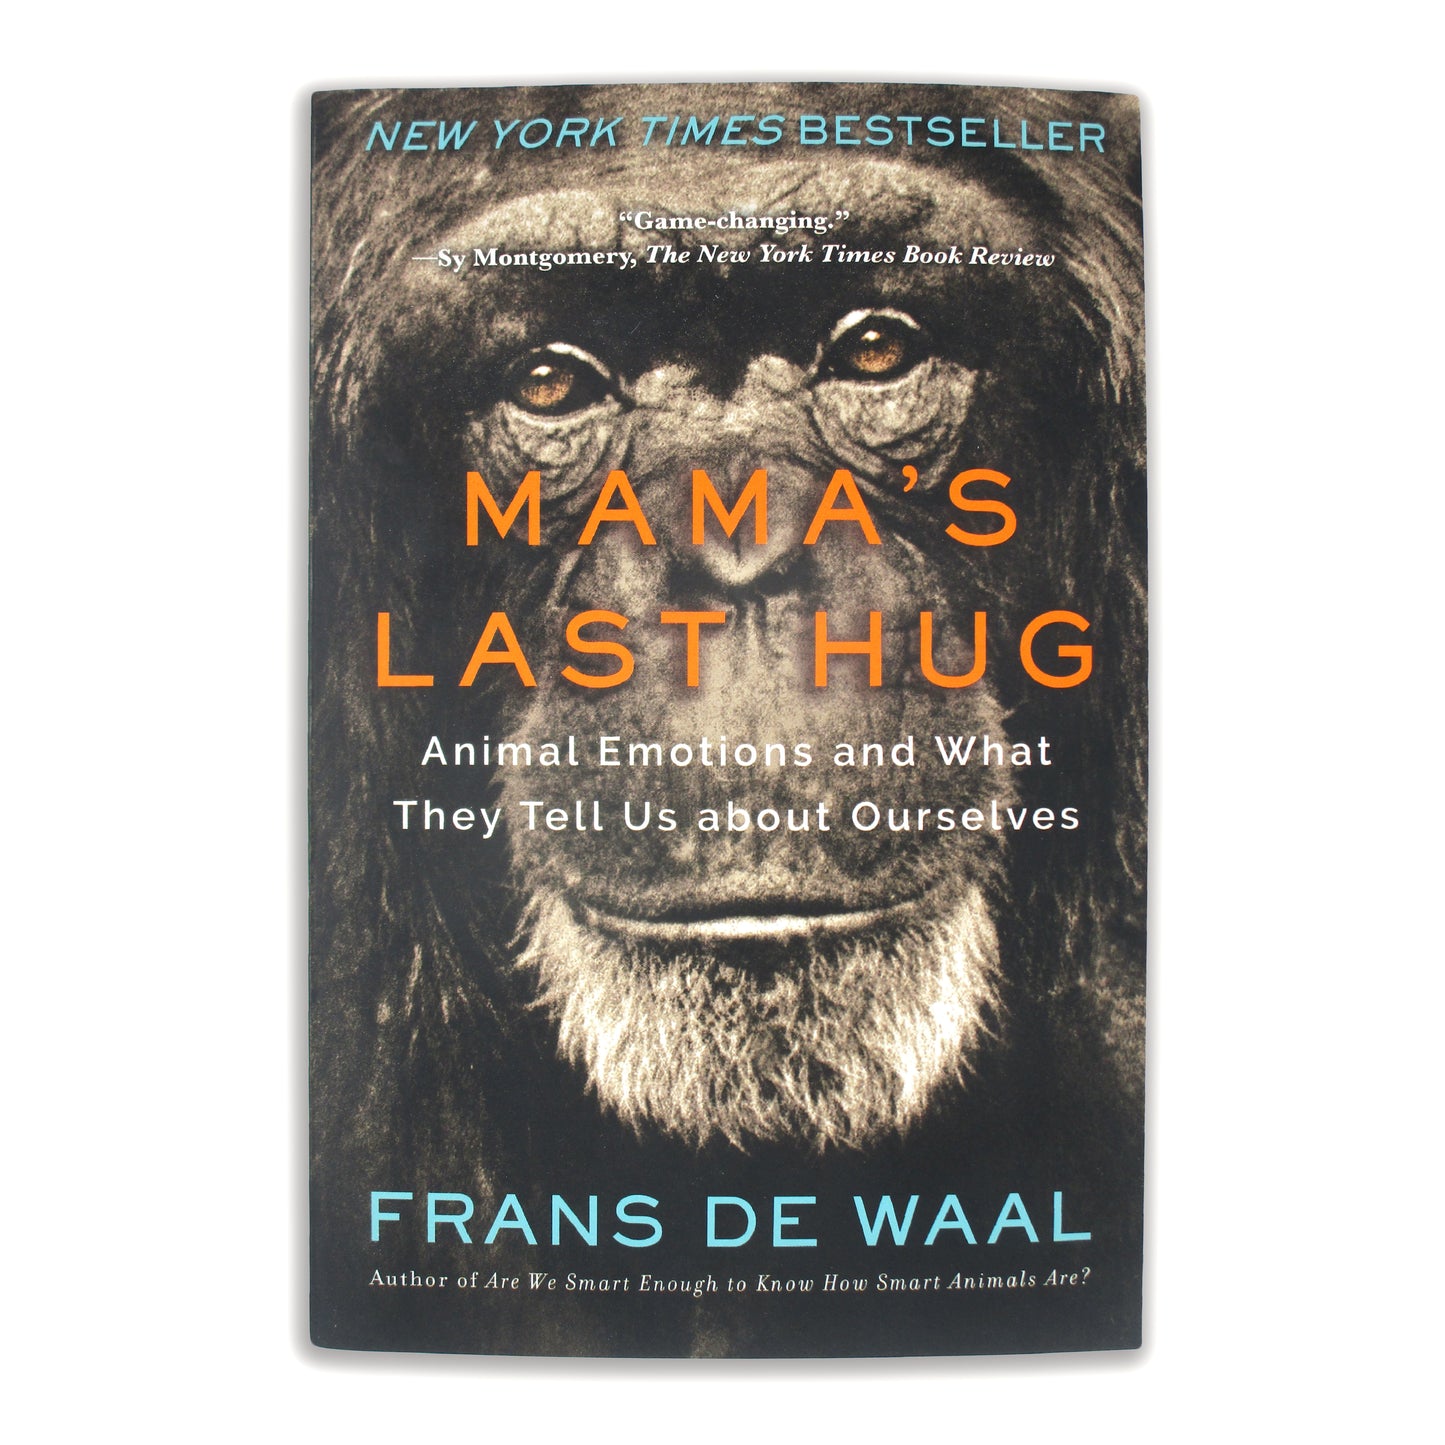 Mama's Last Hug: Animal Emotions and What They Tell Us about Ourselves - Frans De Waal (paperback)